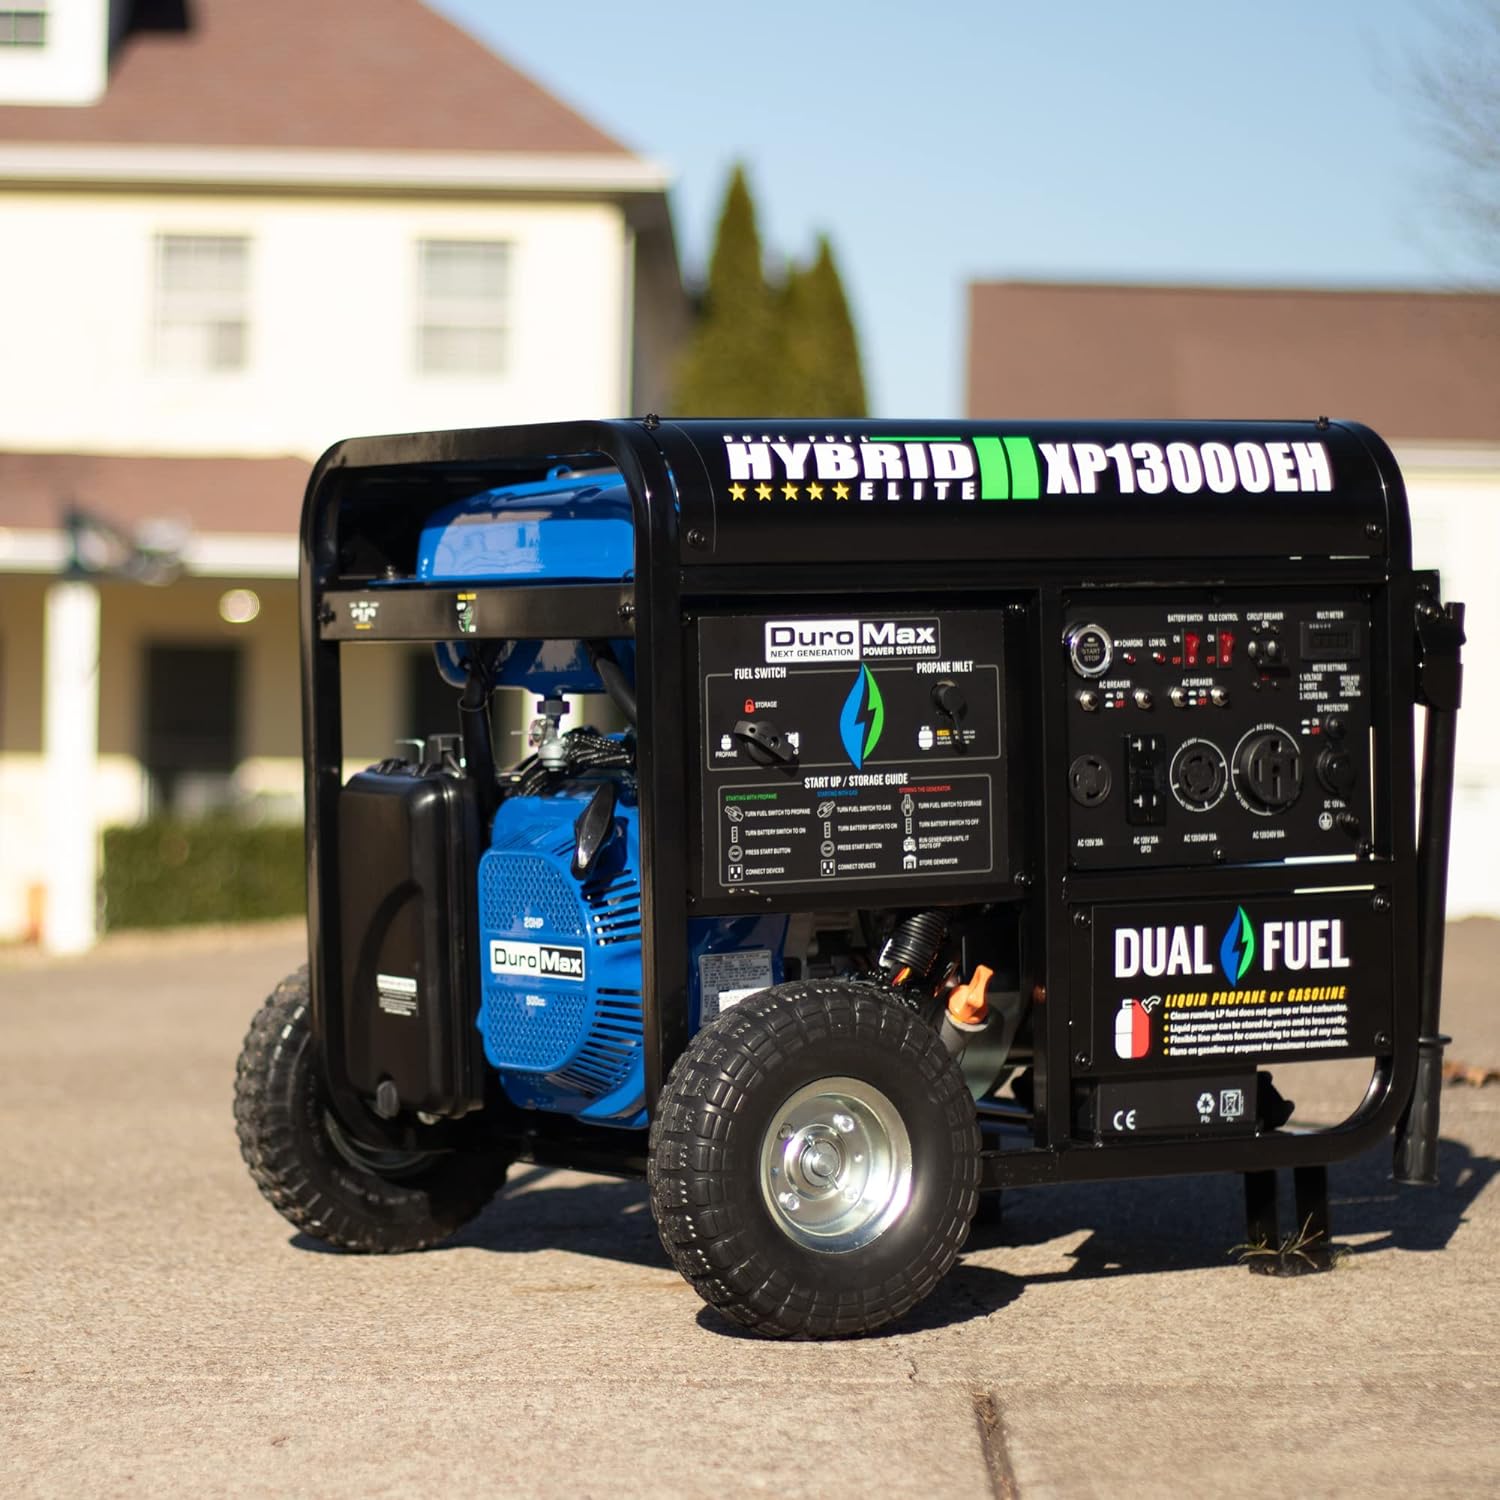 DuroMax XP13000EH Dual Fuel Portable Generator 13000 Watt Gas or Propane Powered Electric Start-Home Back Up, Blue/Gray - DuroMax XP13000EH Dual Fuel Portable Generator Review